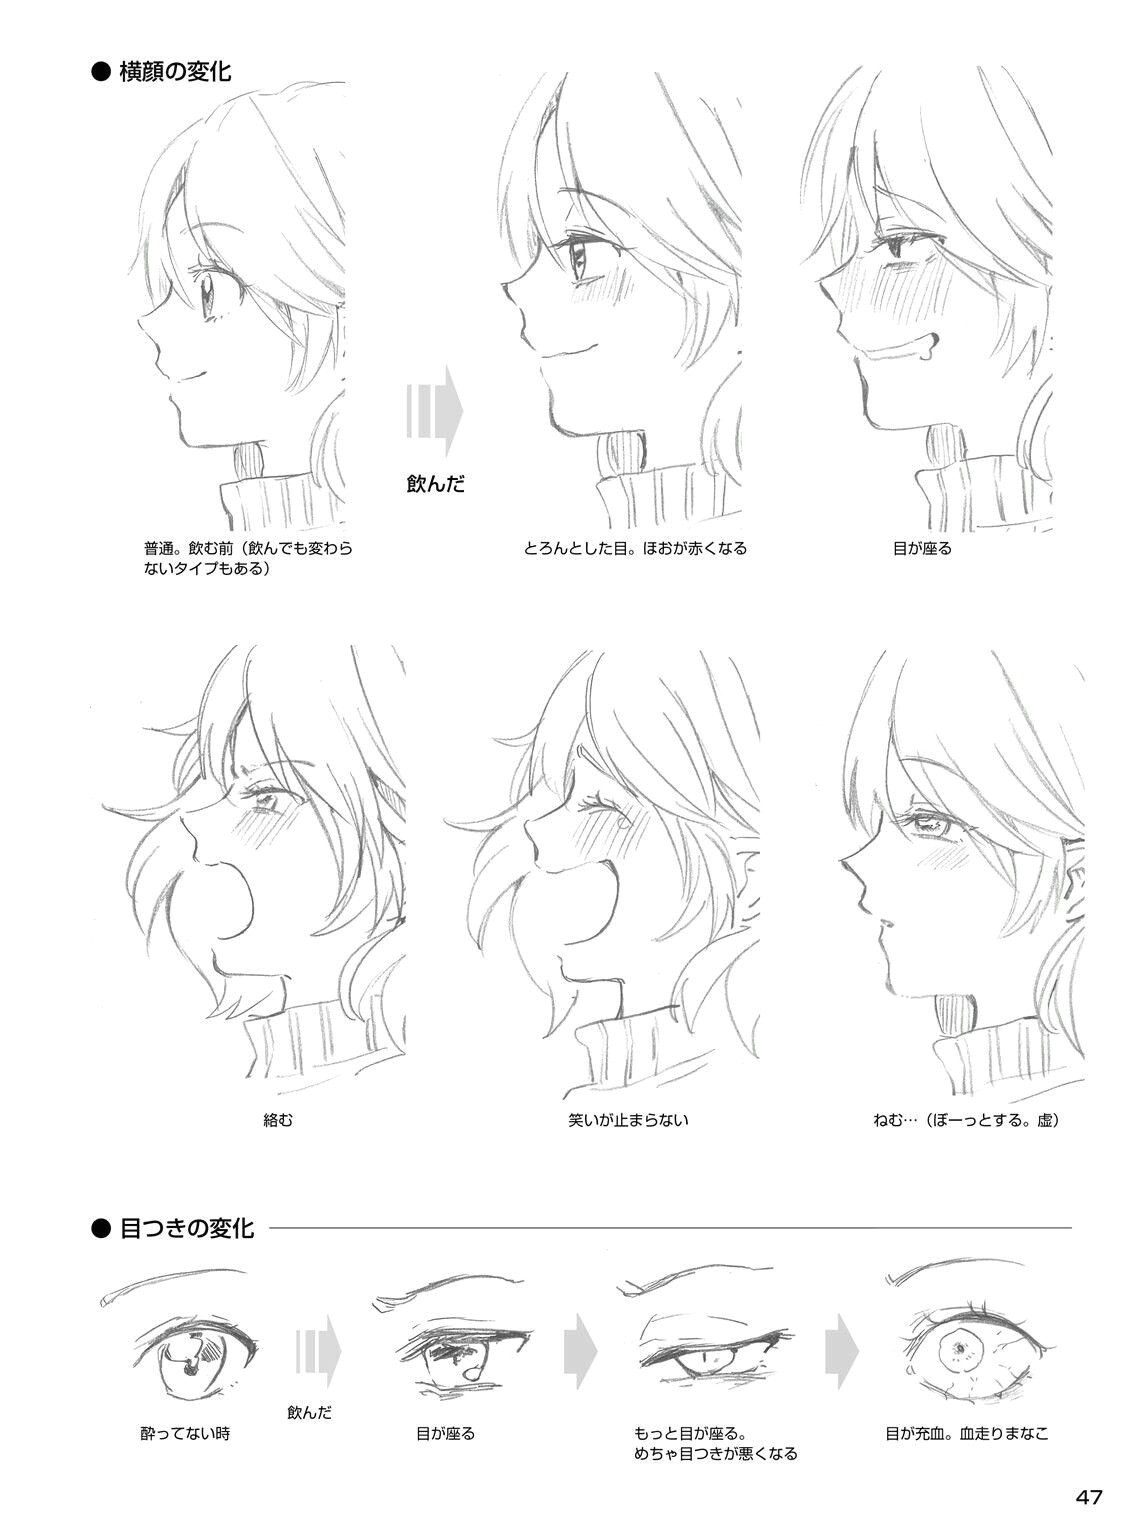 Drawing Anime Head Tutorial Pin by Wolf Drawing64 On Anime Manga Art Drawing Tips Pinterest